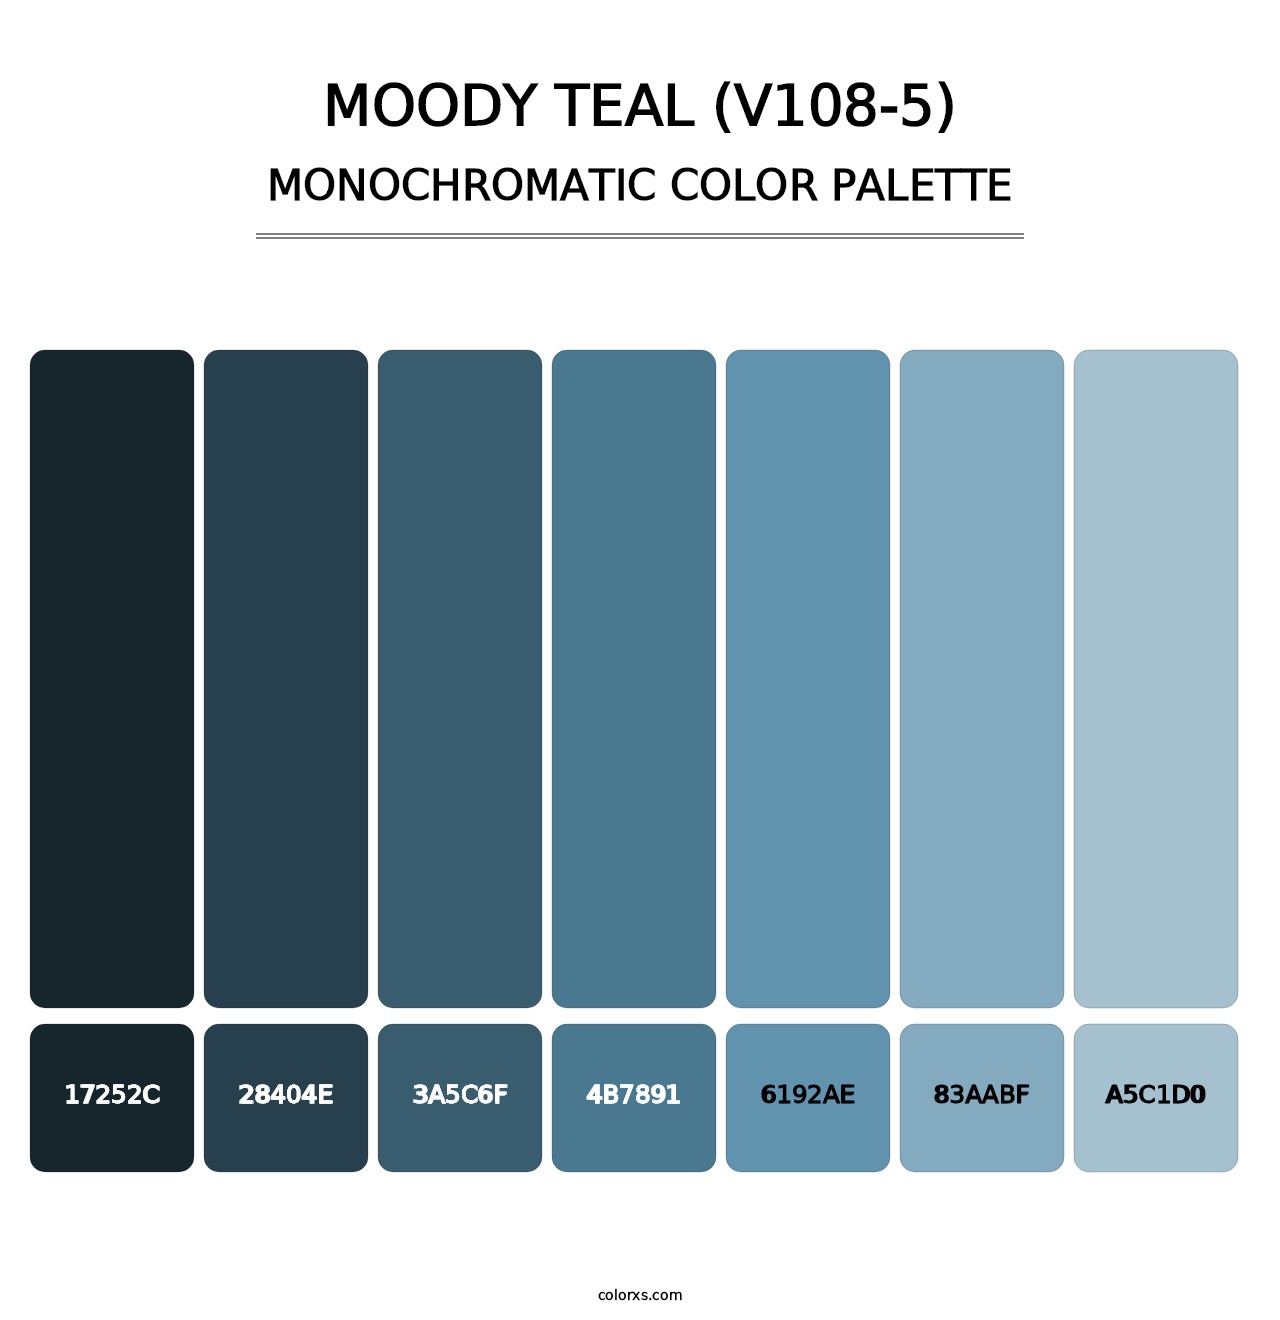 Moody Teal (V108-5) - Monochromatic Color Palette